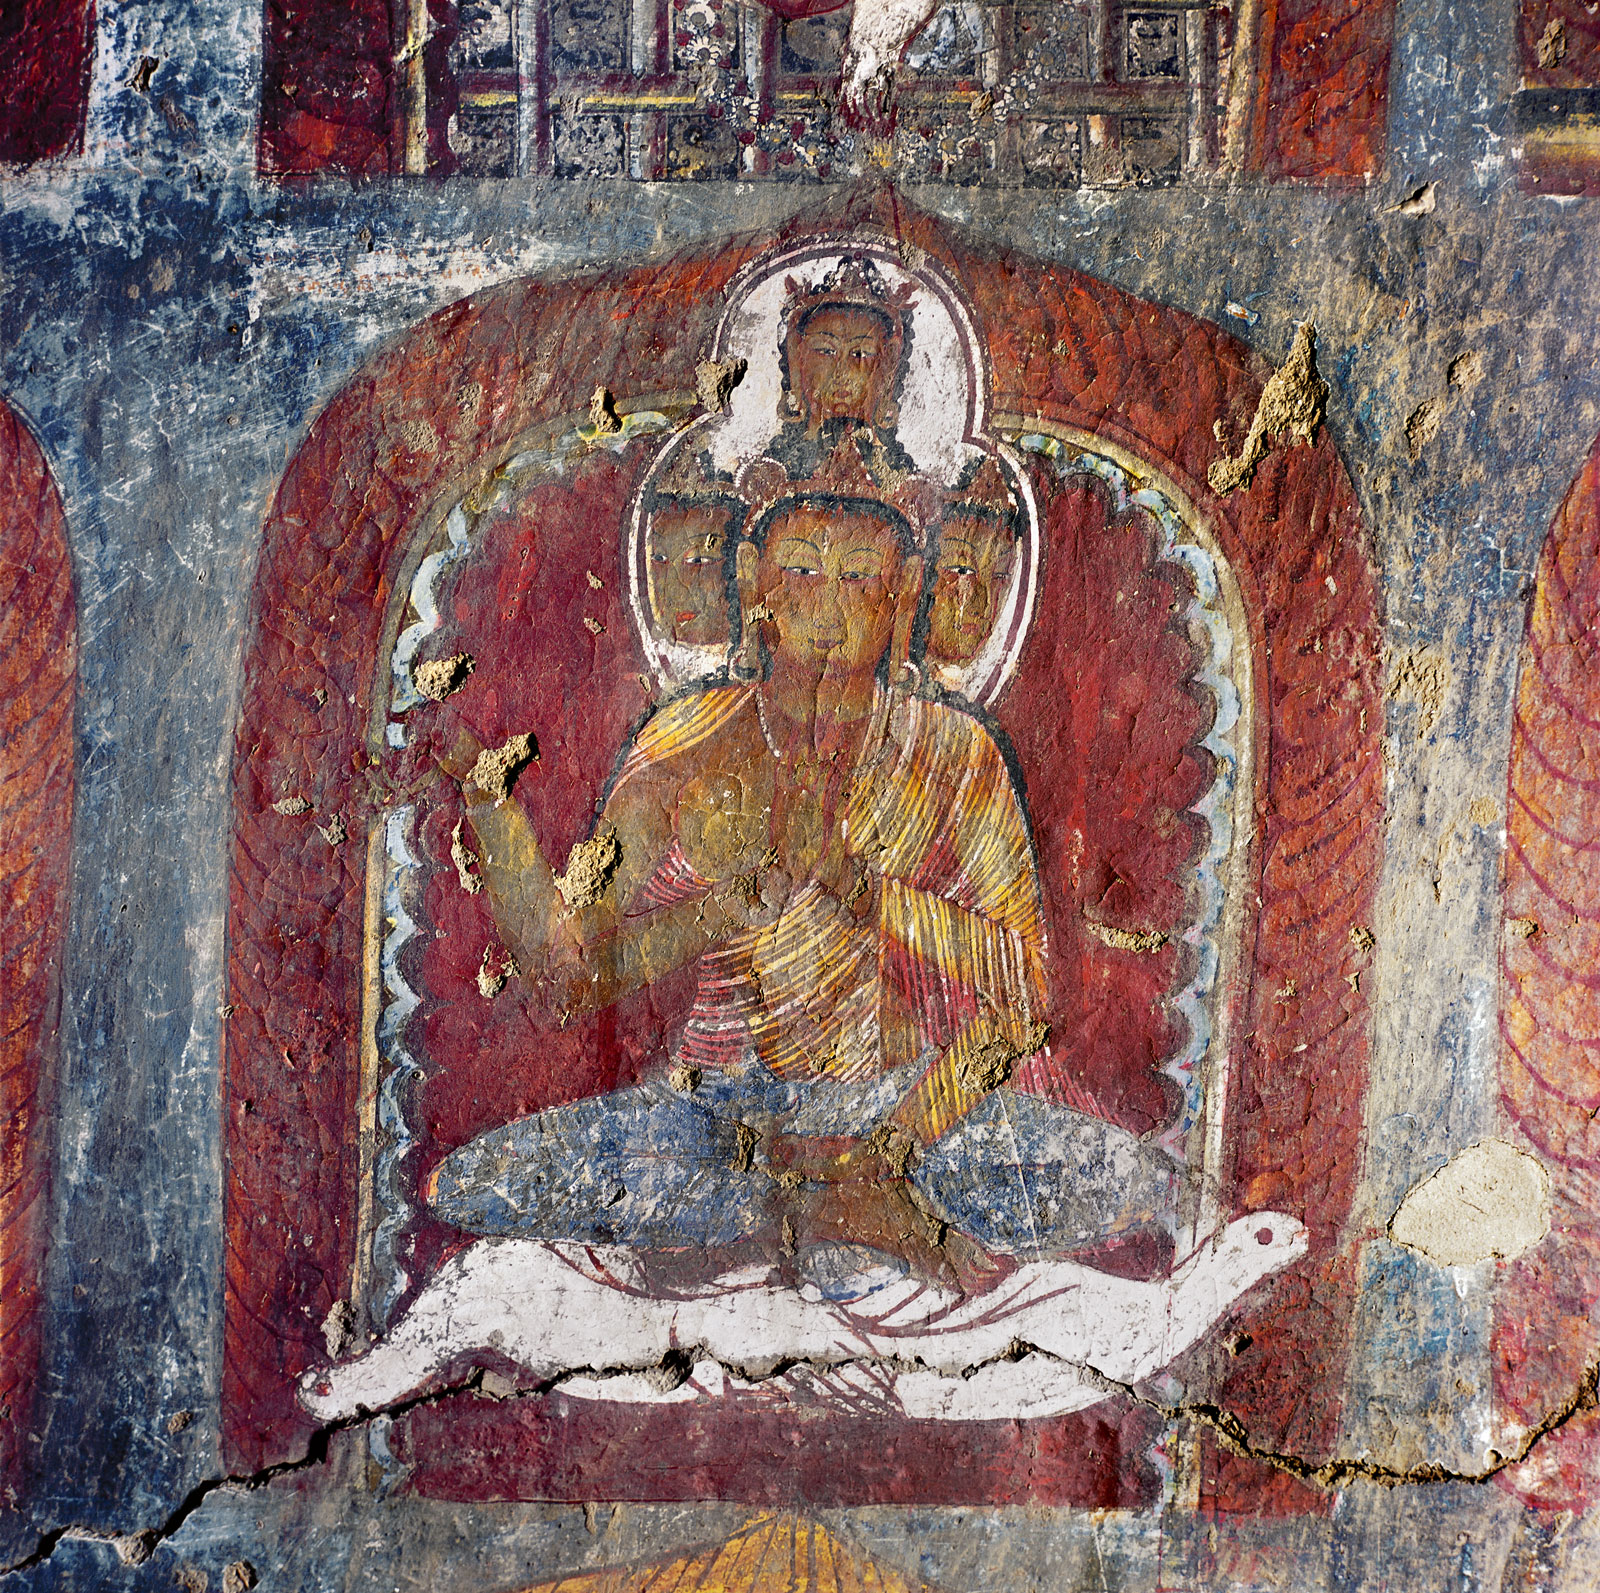 Detail of a wall painting showing Brahma, the God of Creation, with four heads and four arms, riding two geese, Nako, late eleventh to early twelfth century